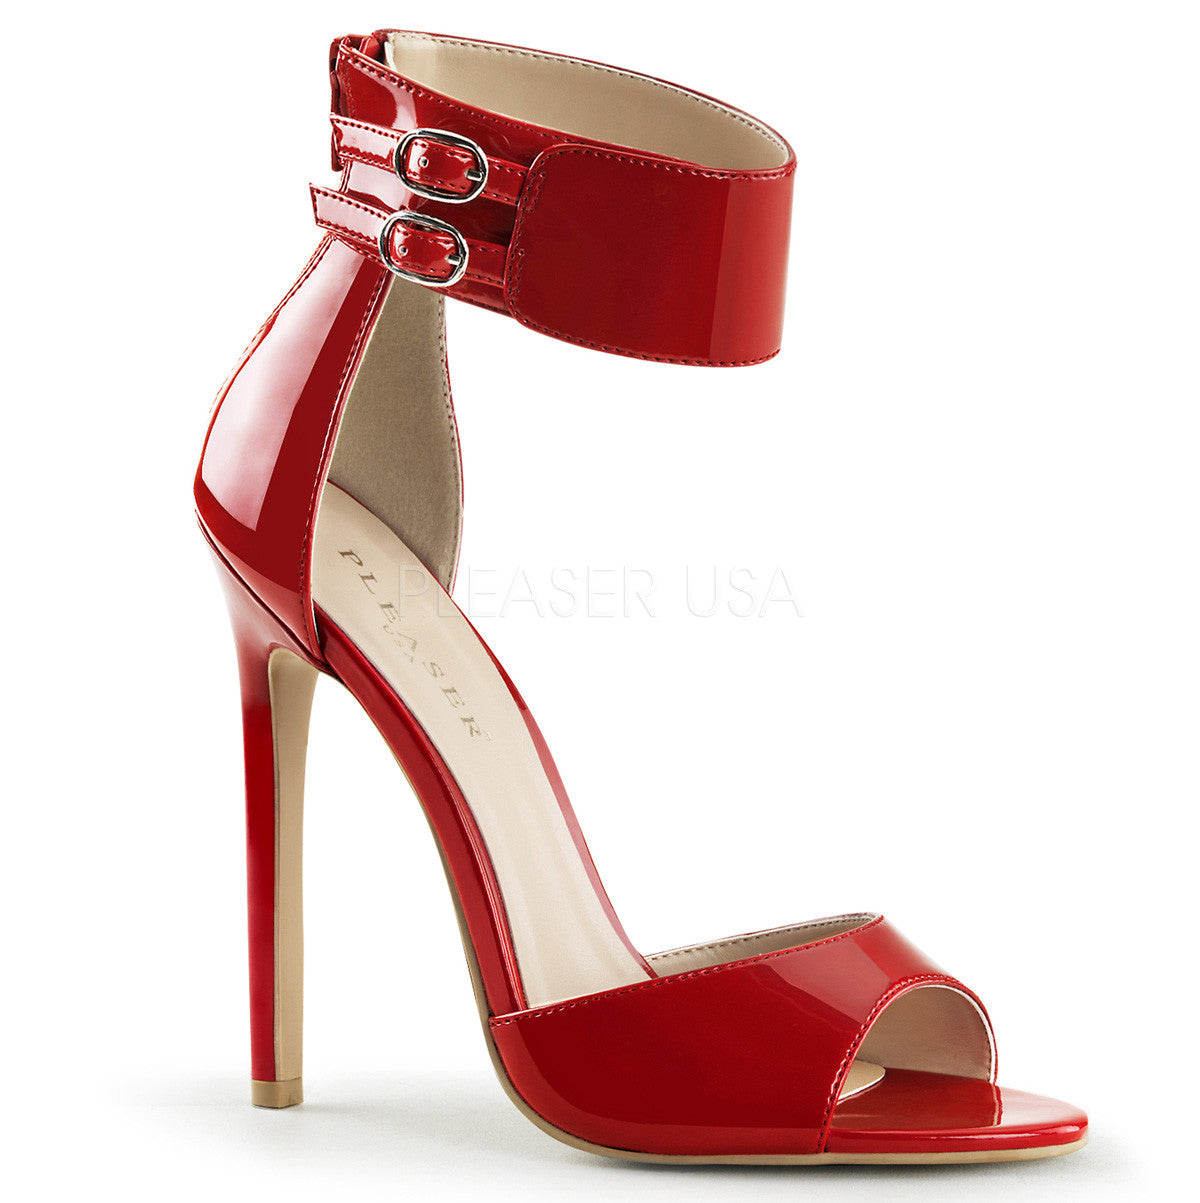 Pleaser SEXY-19 Red Patent Ankle Strap Sandals - Shoecup.com